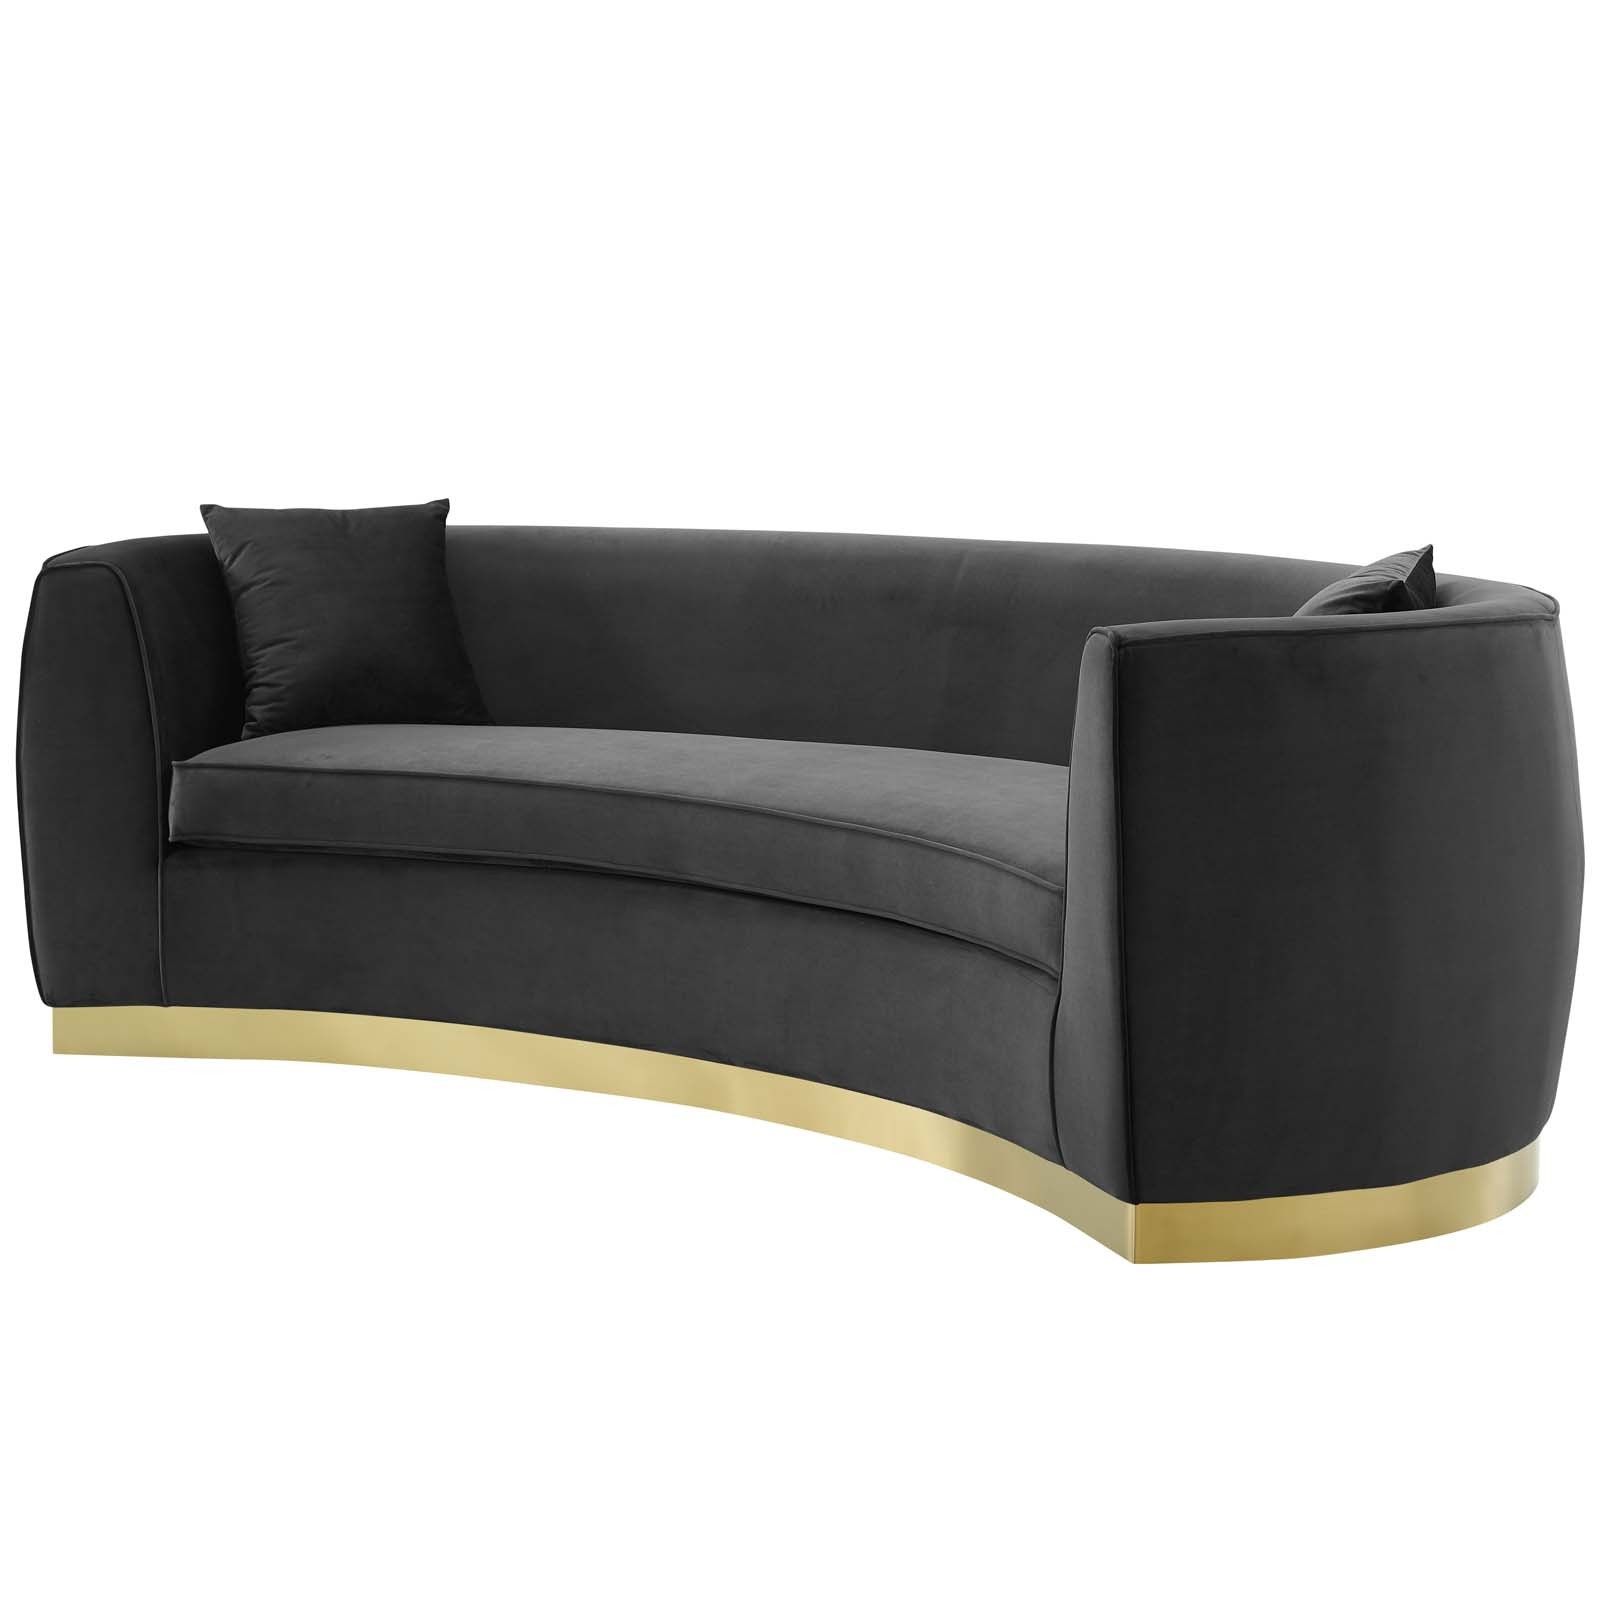 2019 4pc French Seamed Sectional Sofas Velvet Black In Modterior :: Living Room :: Sofas/couches :: Resolute (View 17 of 20)